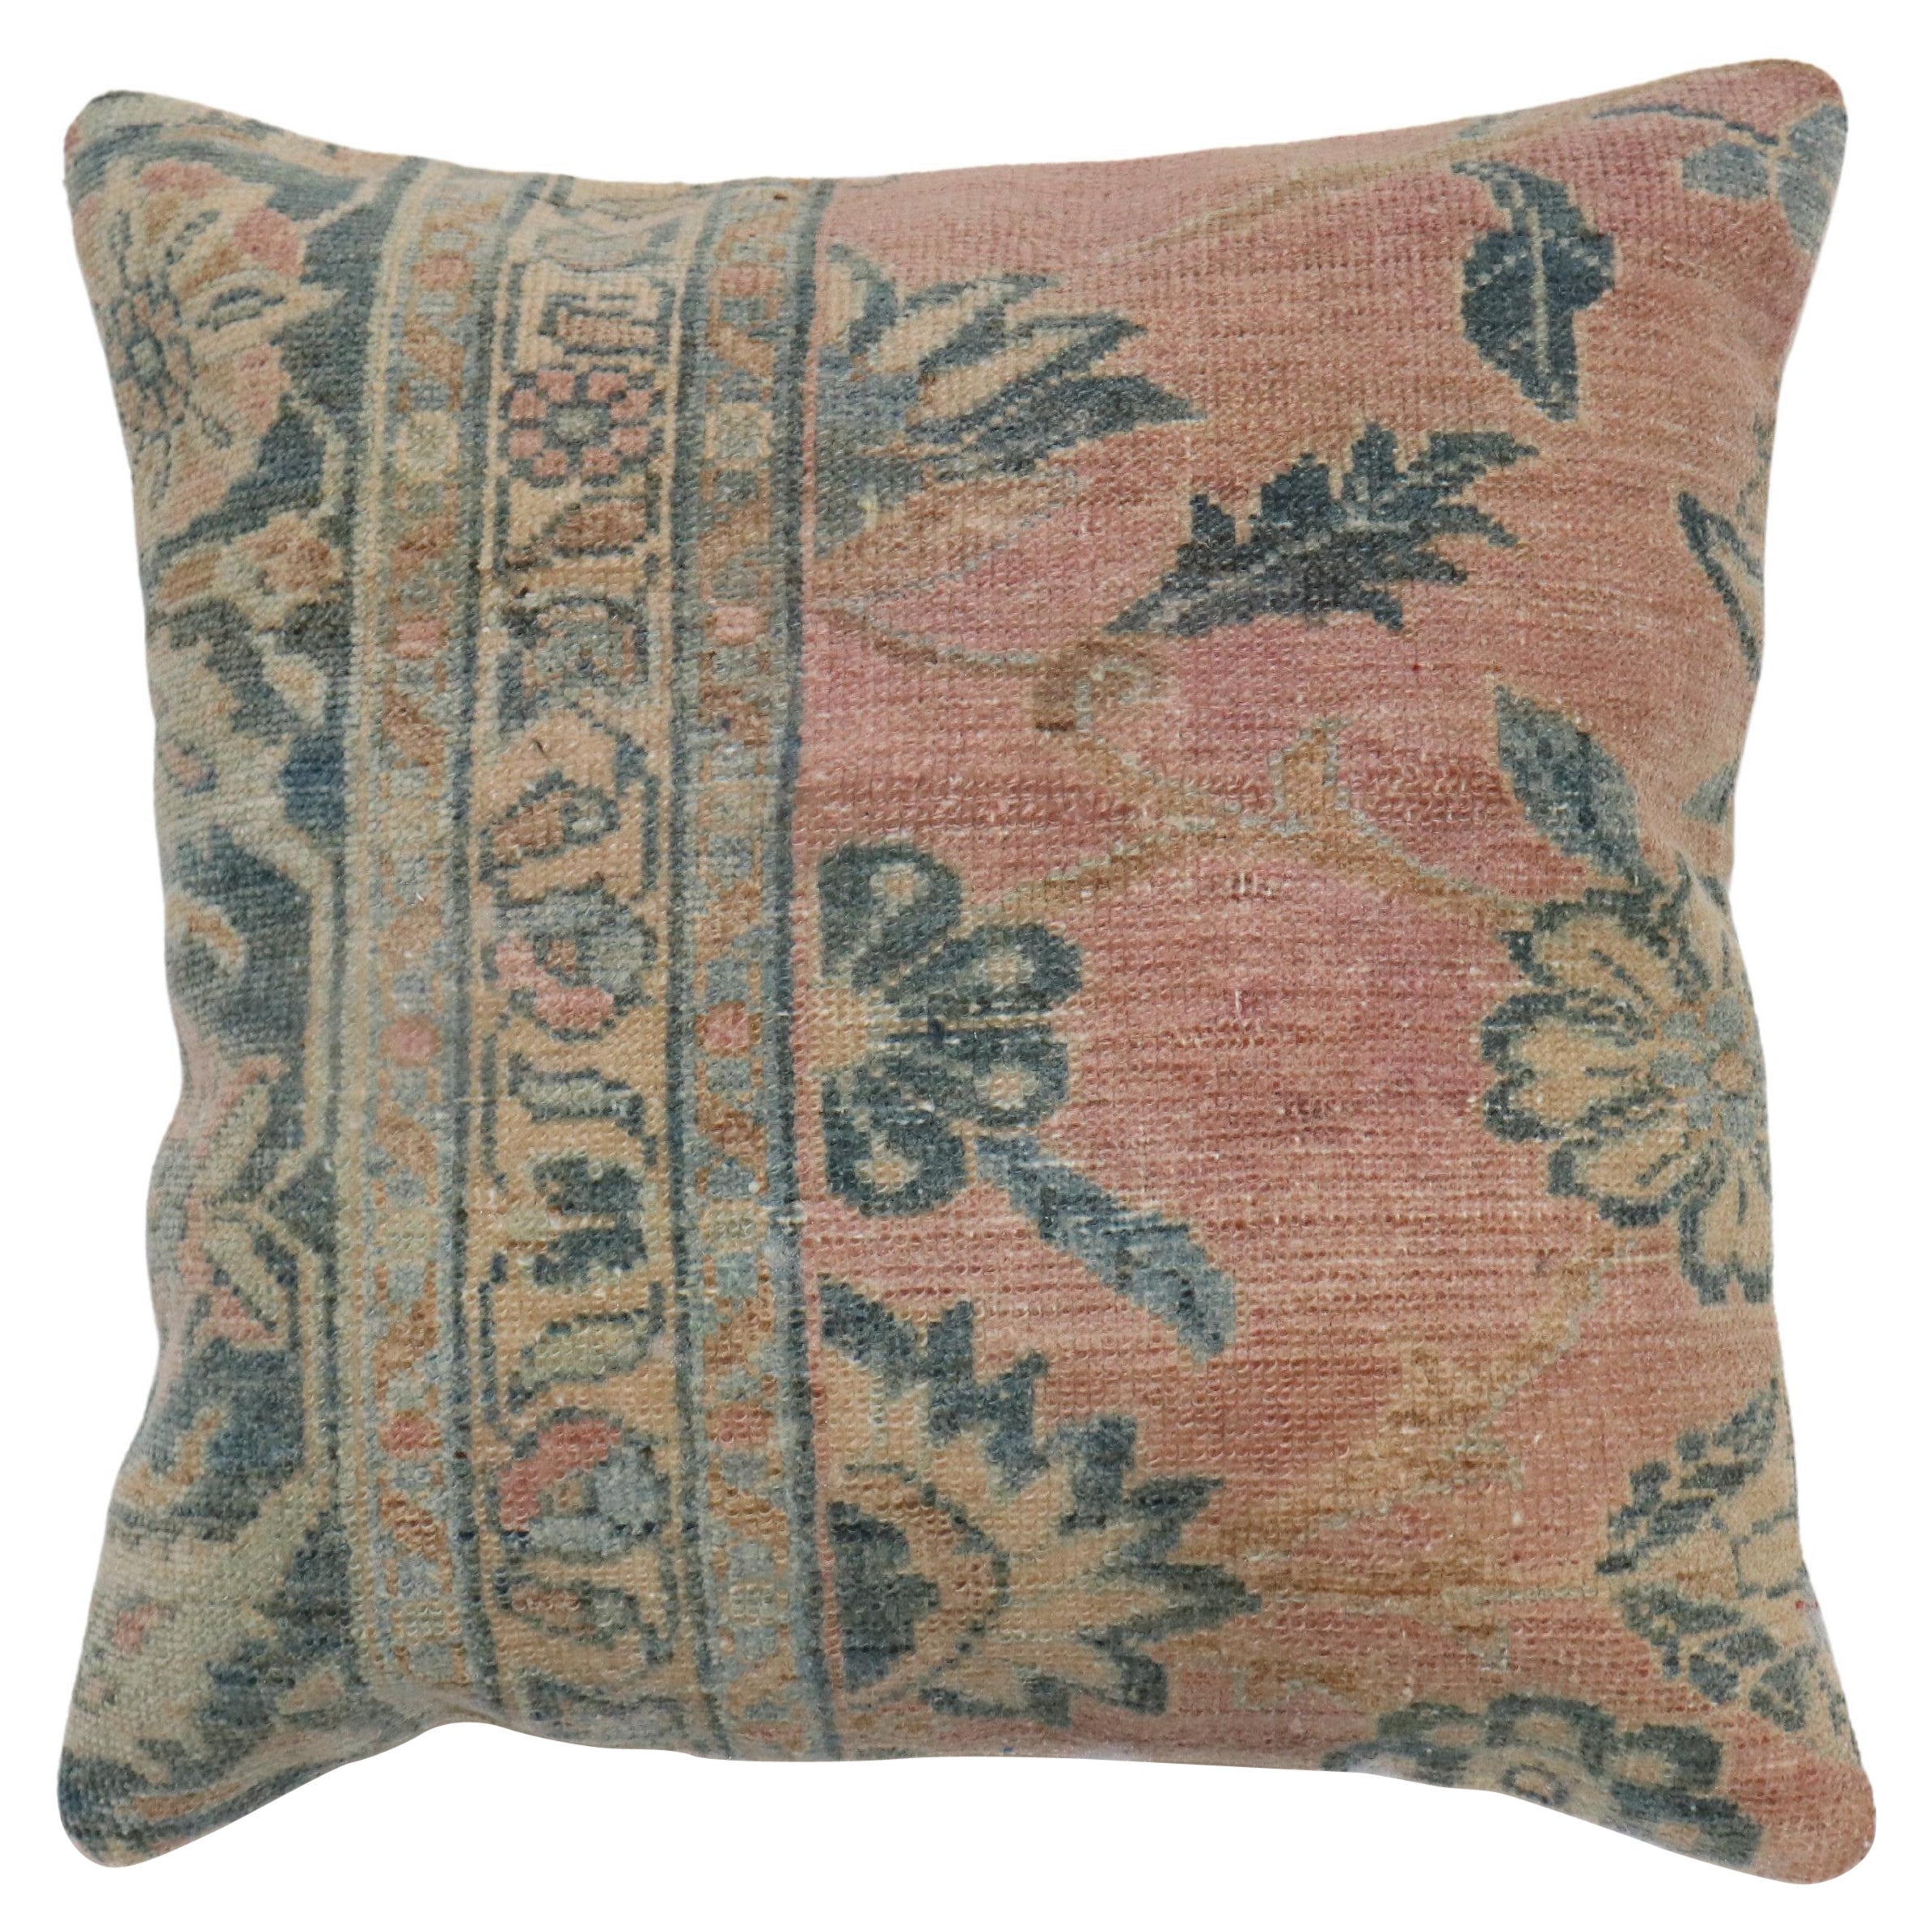 Traditional Persian Square Rug Pillow